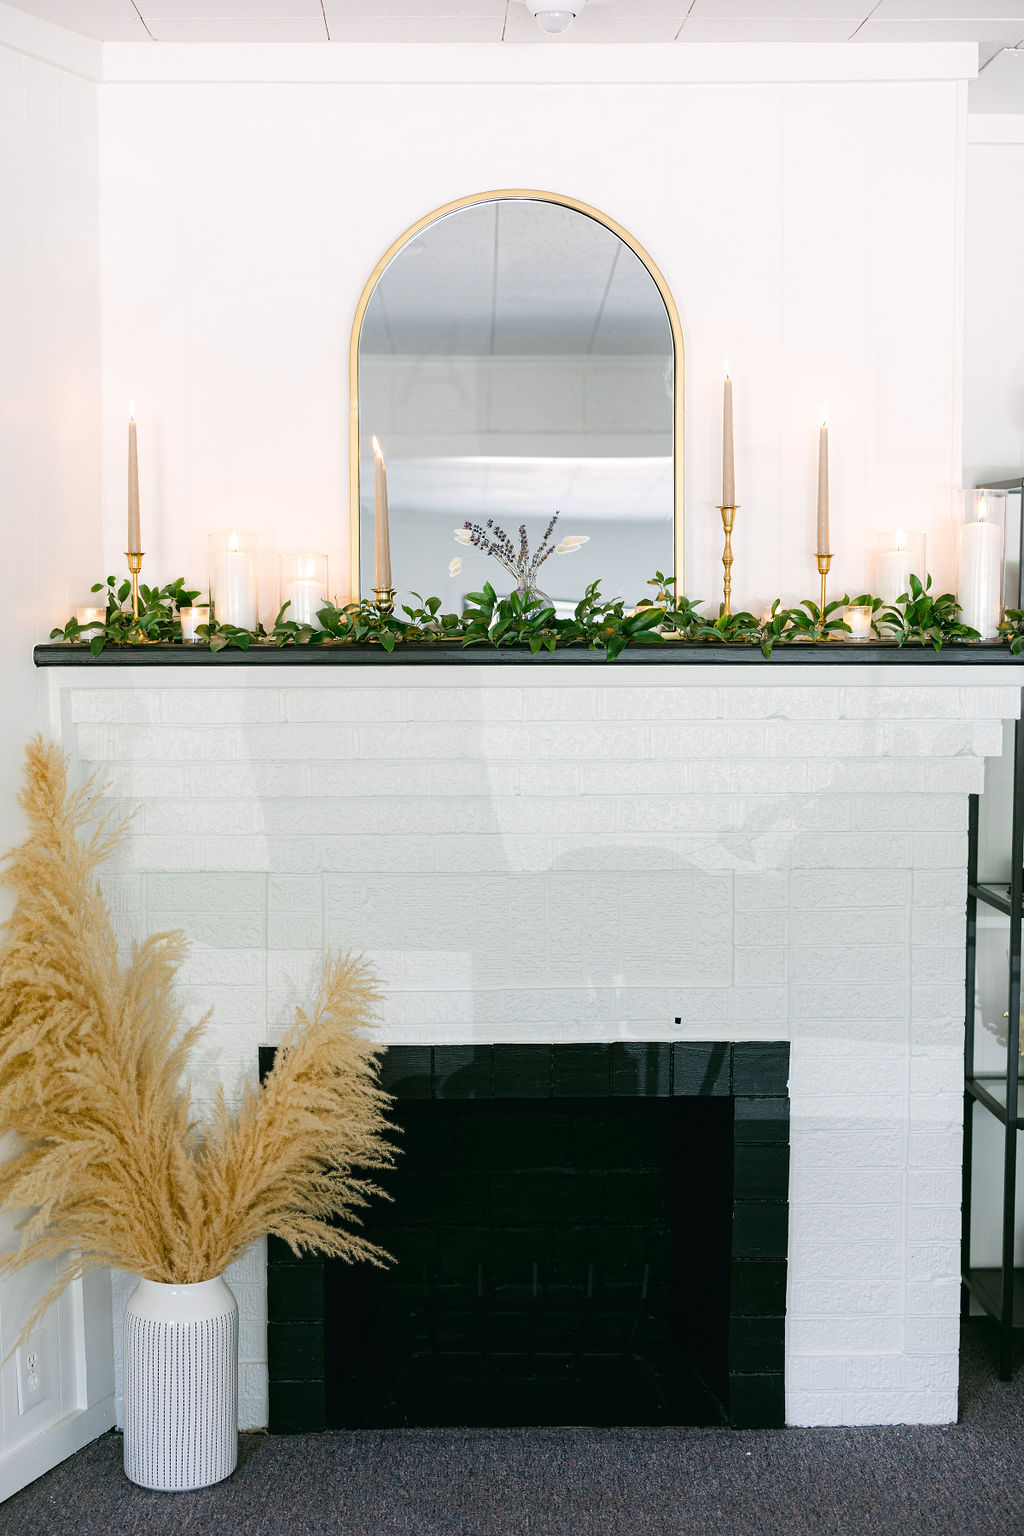 Fireplace greenery and candles